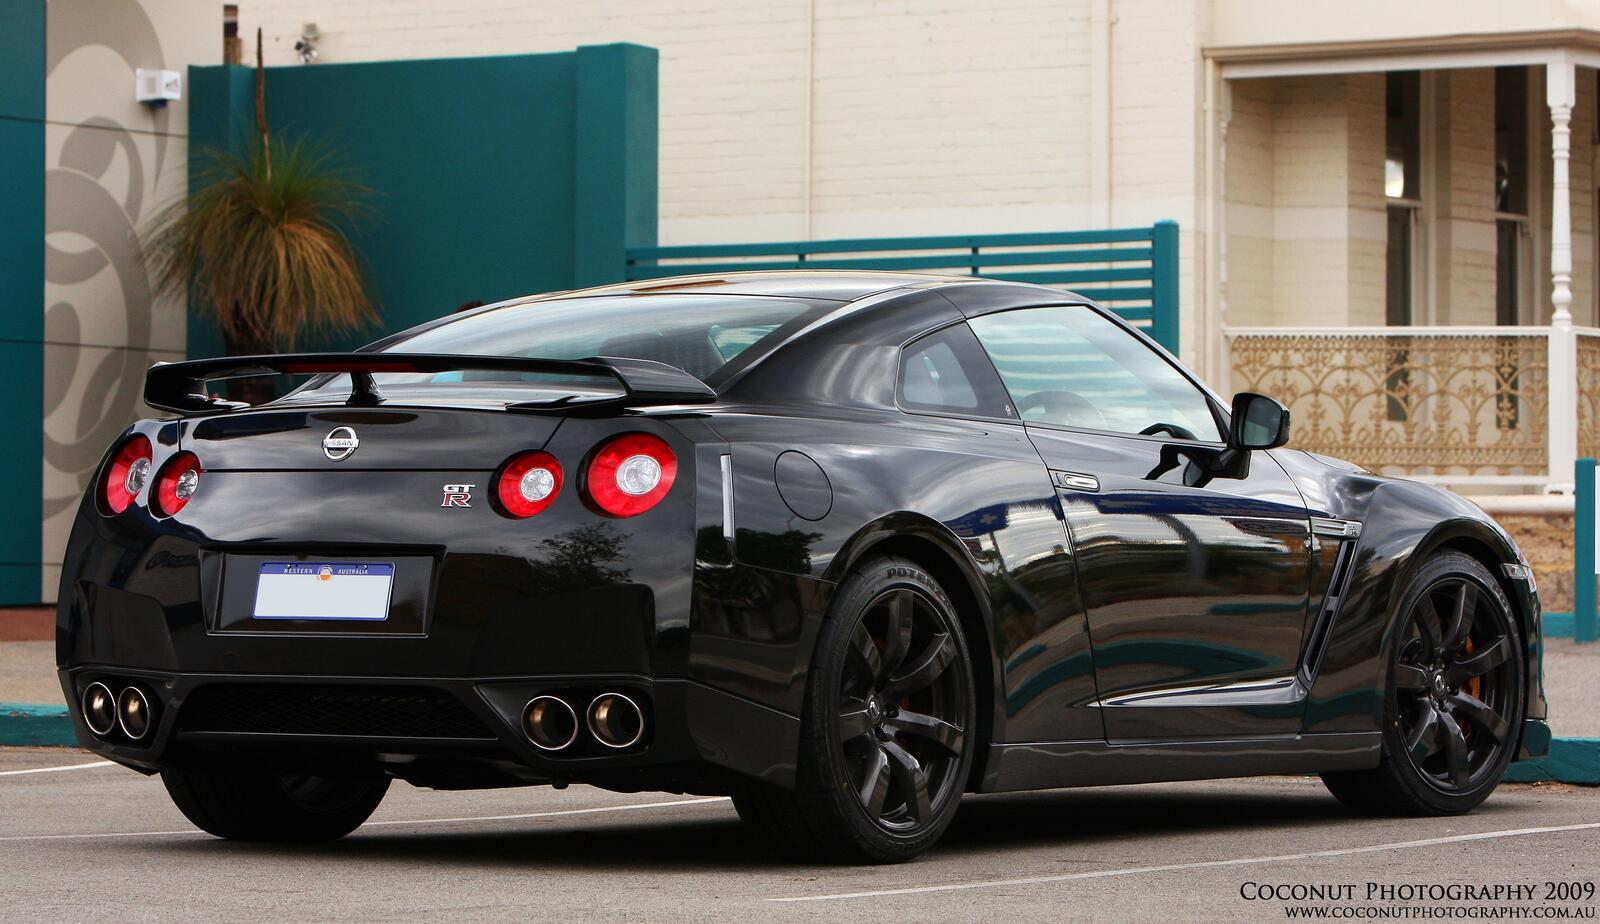 Wallpapers black Nissan GT R sports cars on the desktop